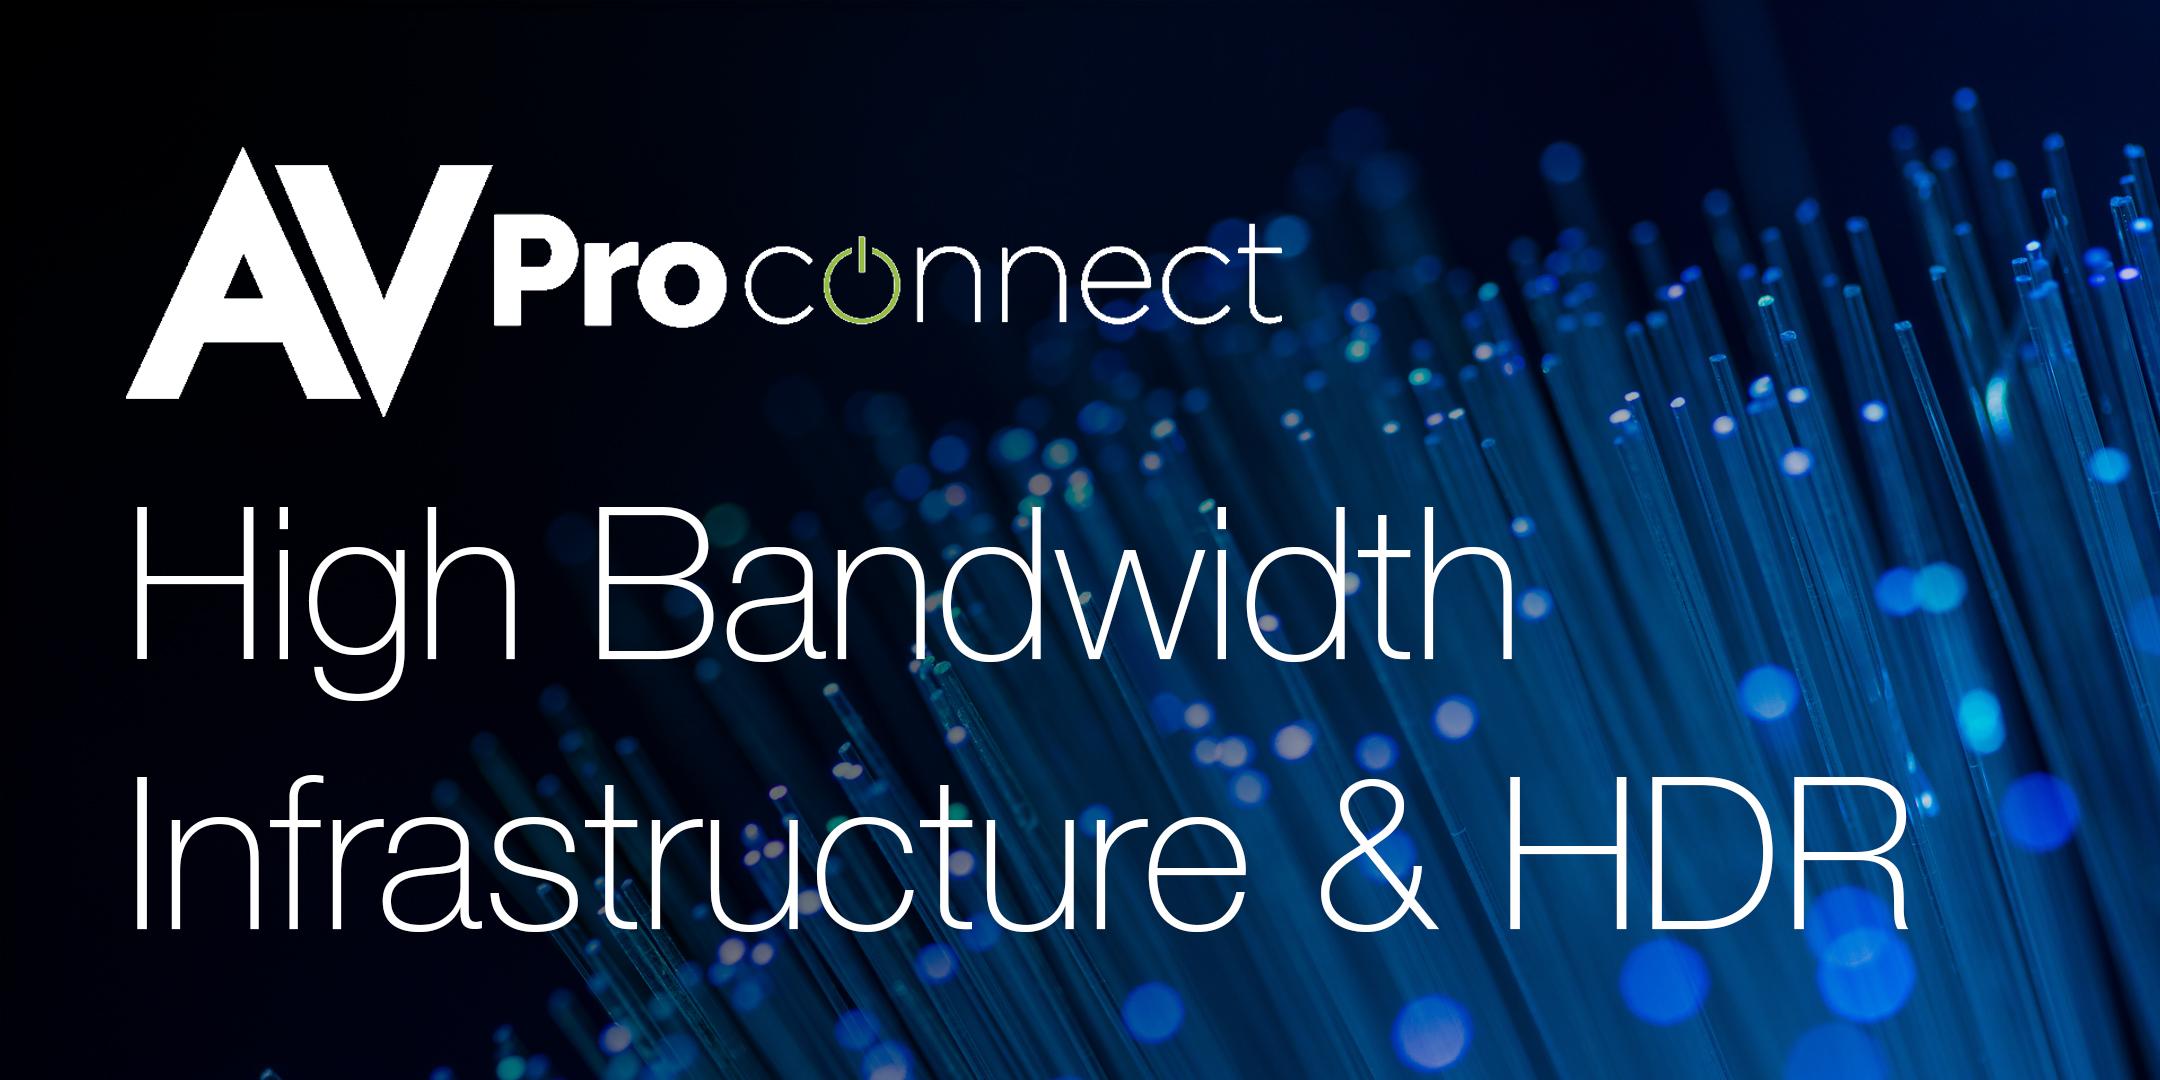 High Bandwidth Infrastructure & HDR with AVProConnect - SJO